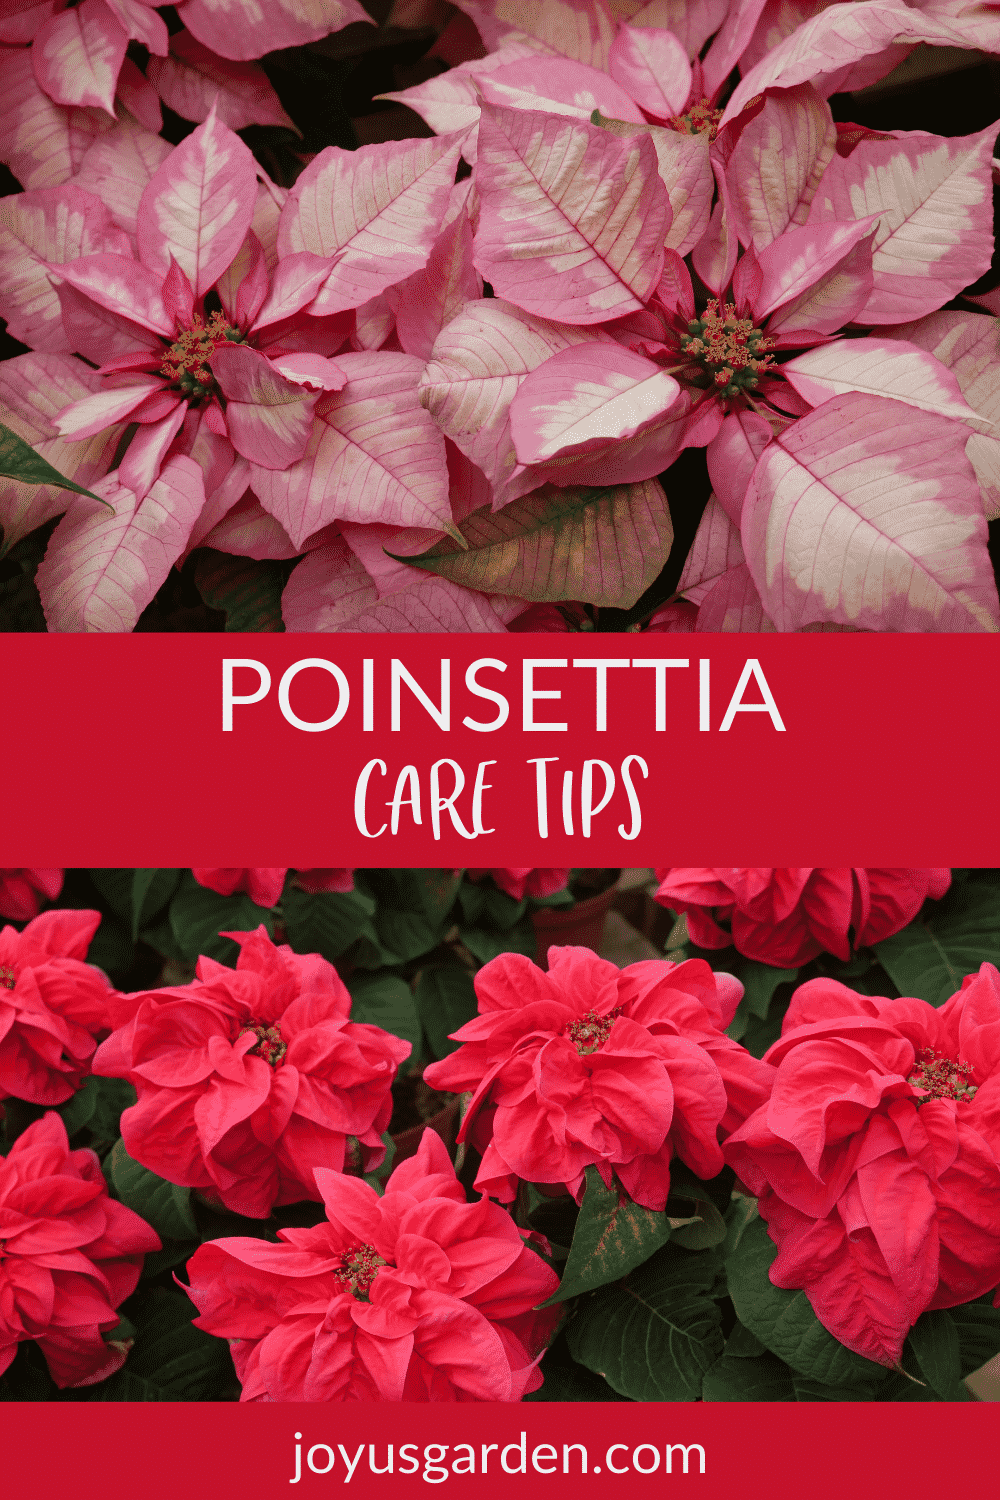 Poinsettia Plant Care: Tips To Keep Yours Looking Good